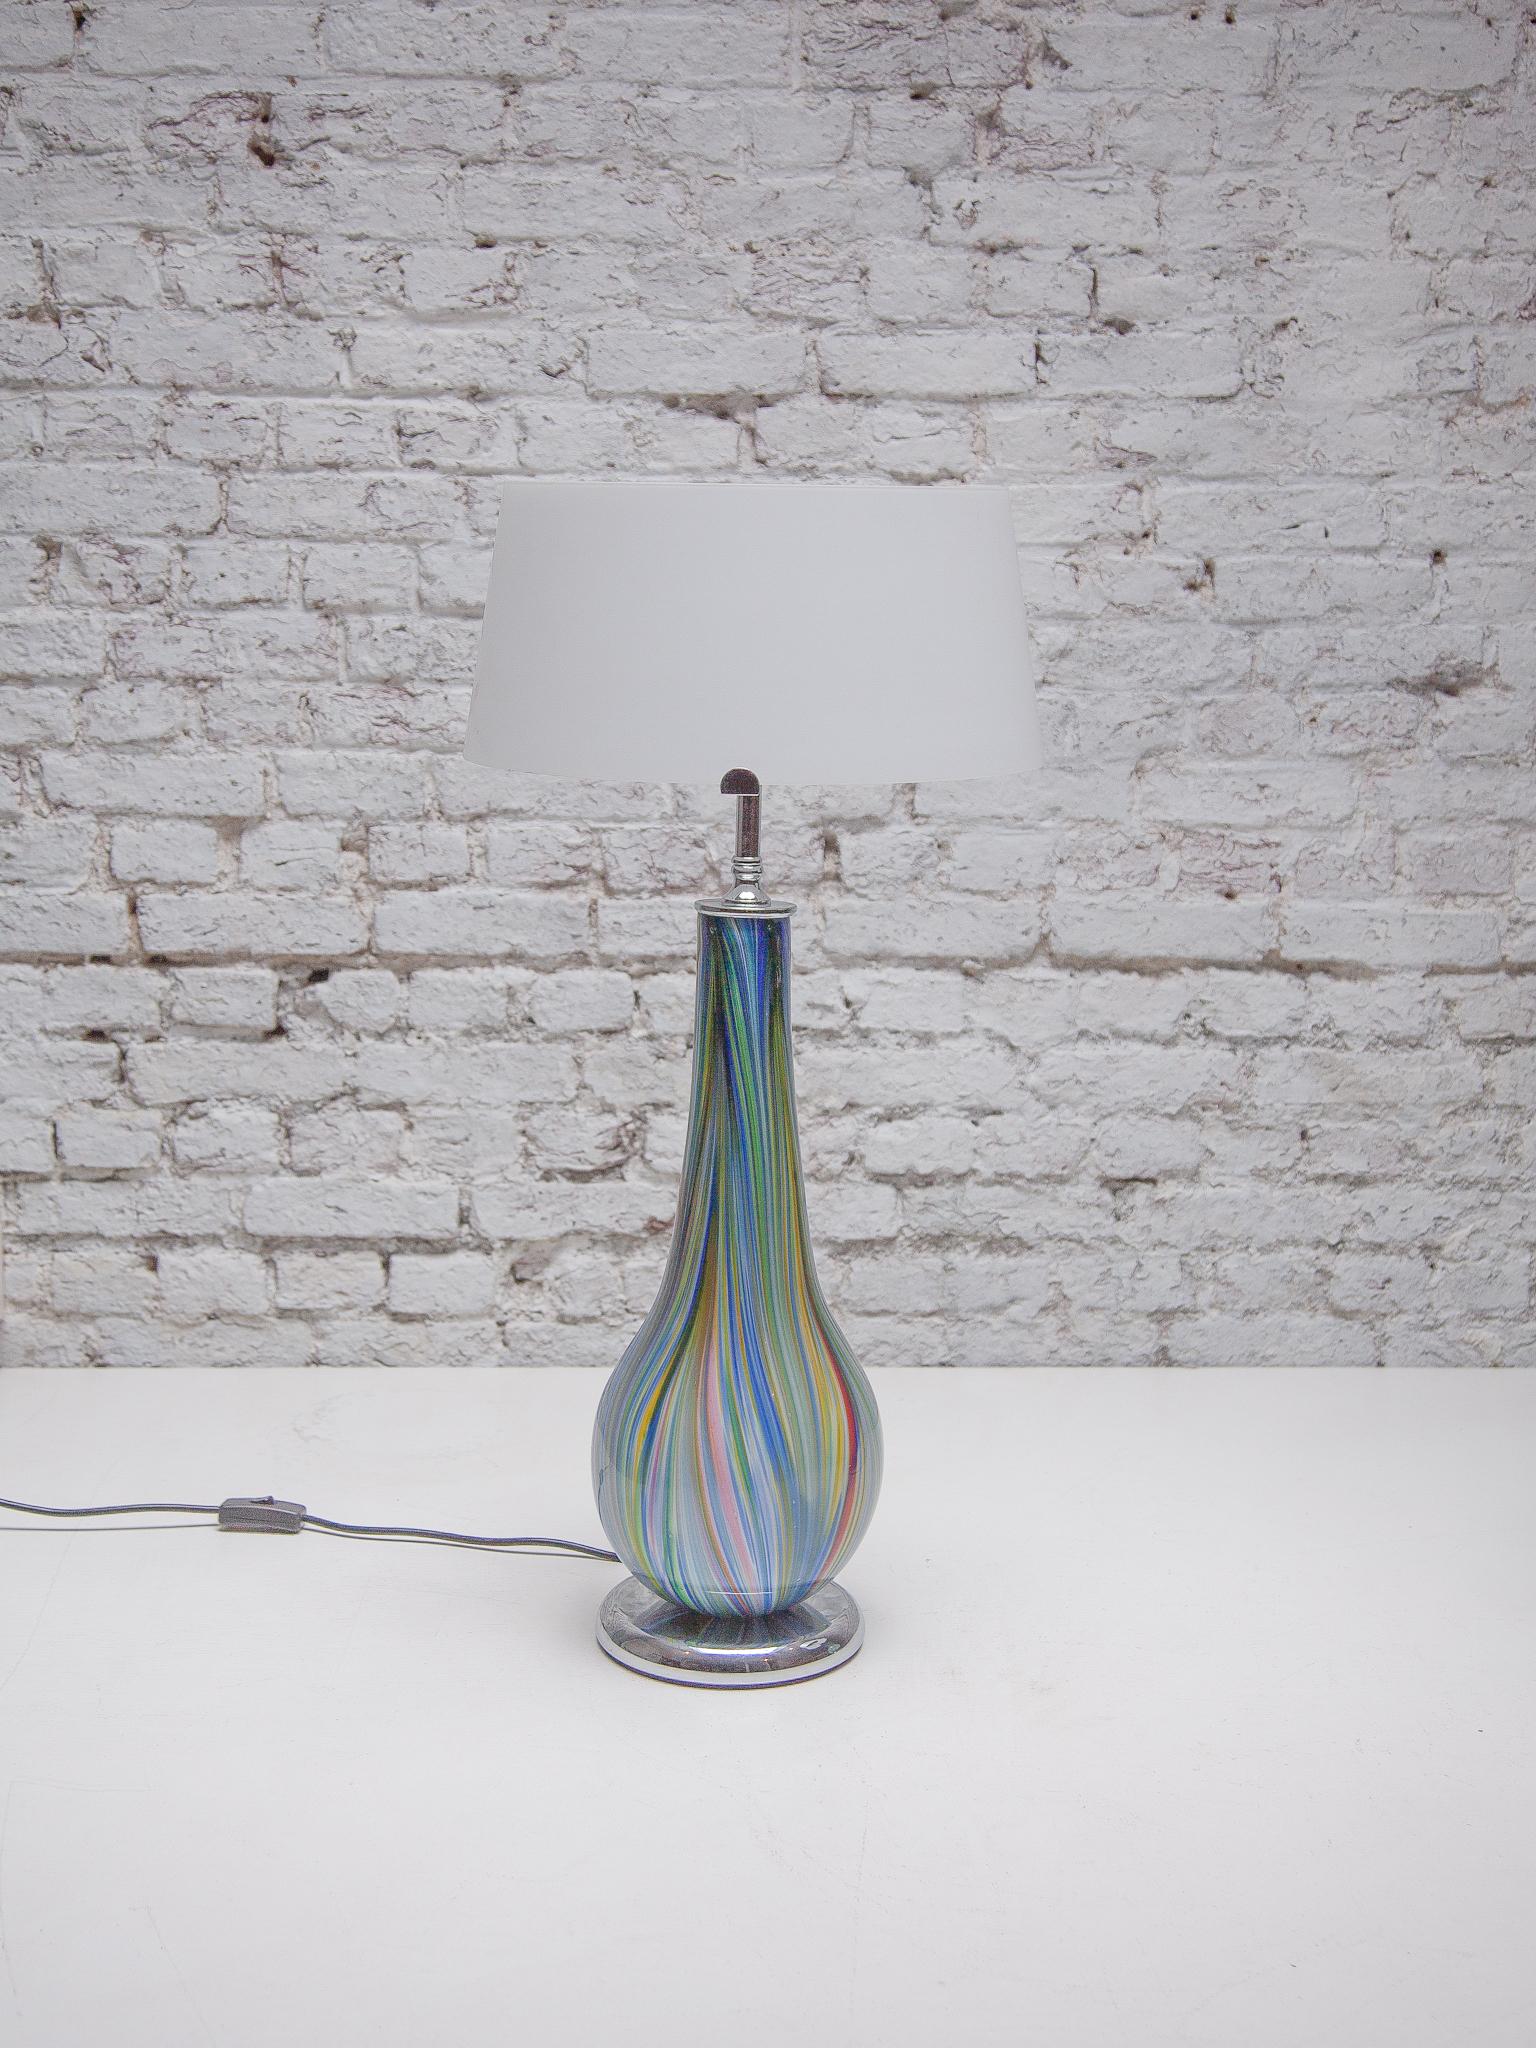 Blown Glass Set of Two Murano Multi Colored Opaline Table Lamps designed by Barbini, 1980s For Sale